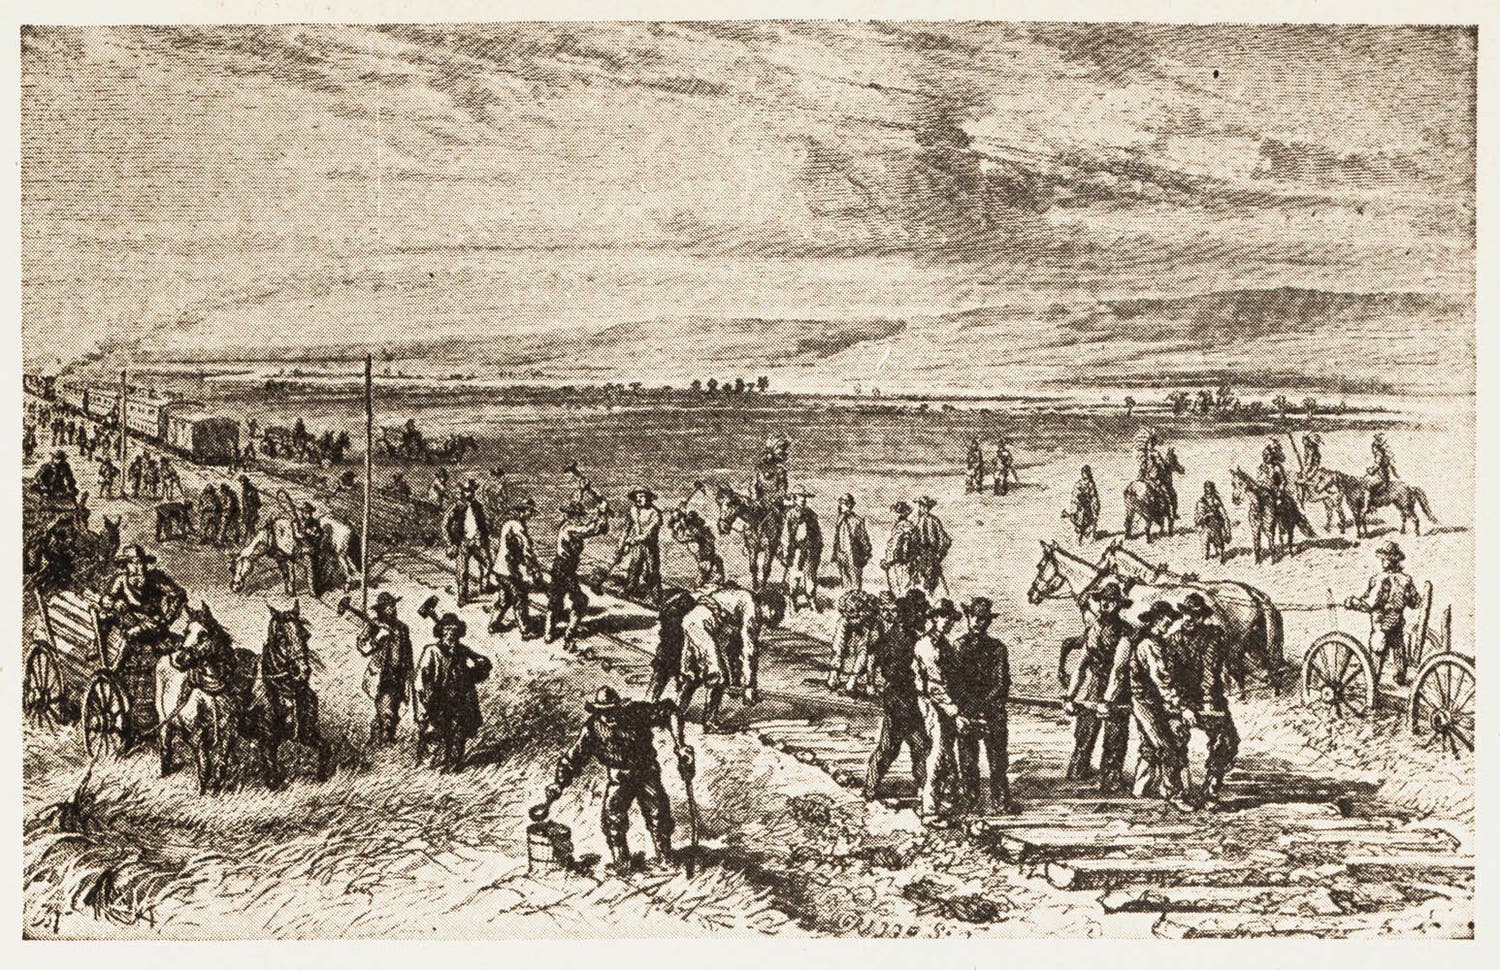 Artist depiction of Union Pacific crews building grade and track through Nebraska. Note the Pawnee Indians guarding the construction crews.